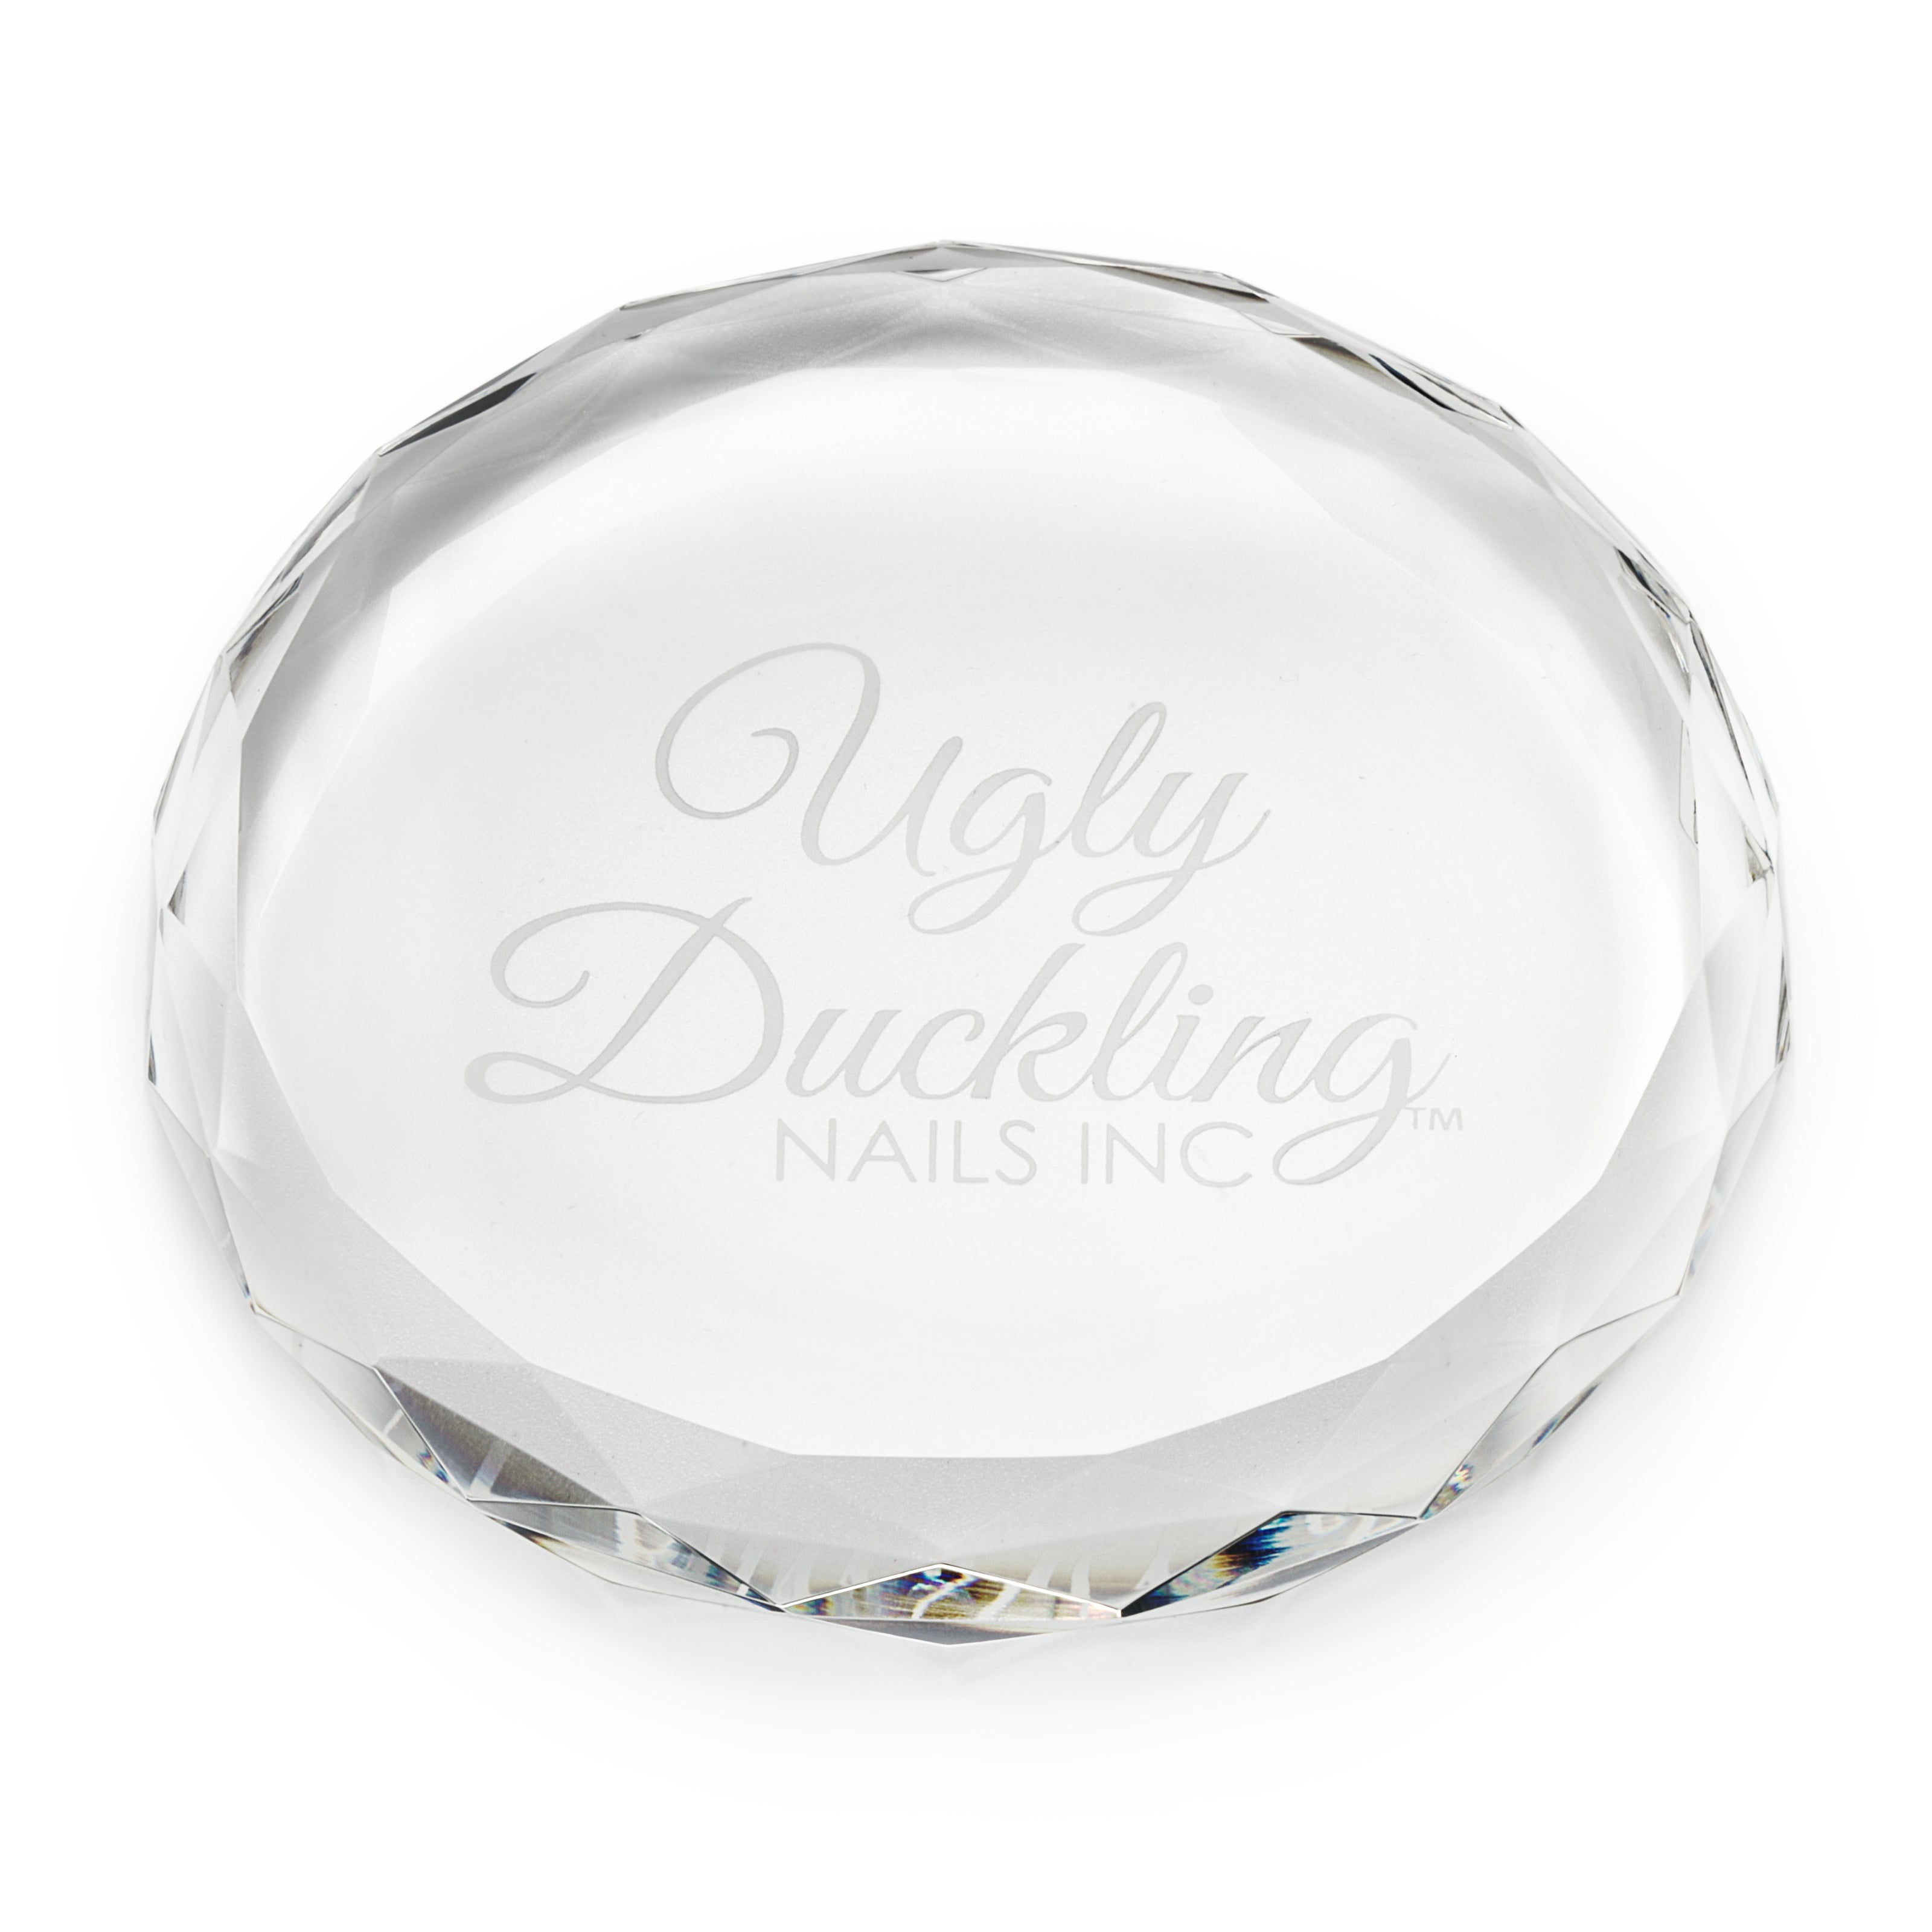 Ugly Duckling Sculpting Gel - White – Polished Pinkies Pro